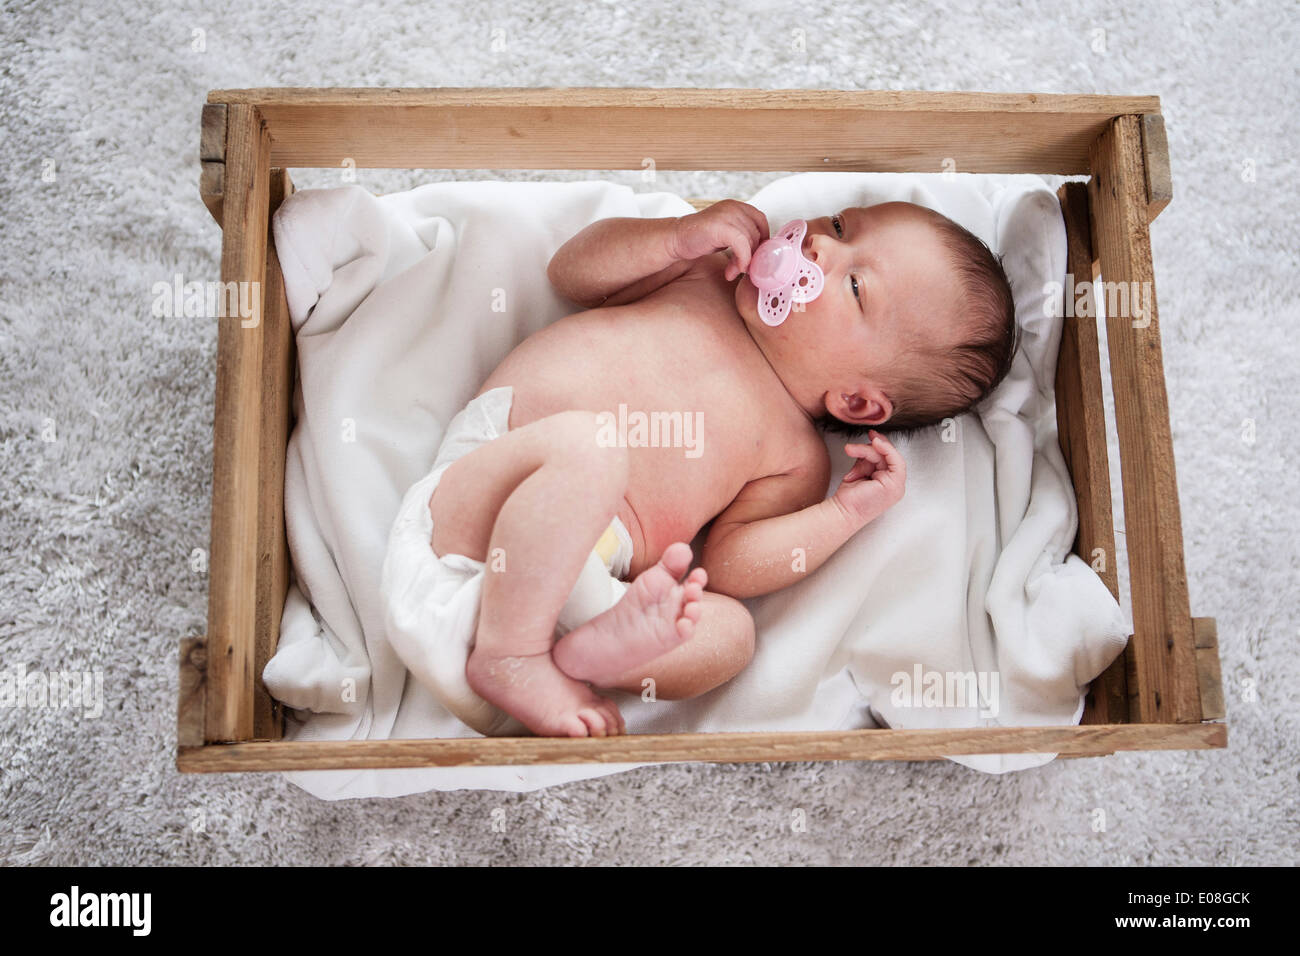 Newborn baby laying asleep with pacifier in mouth Stock Photo